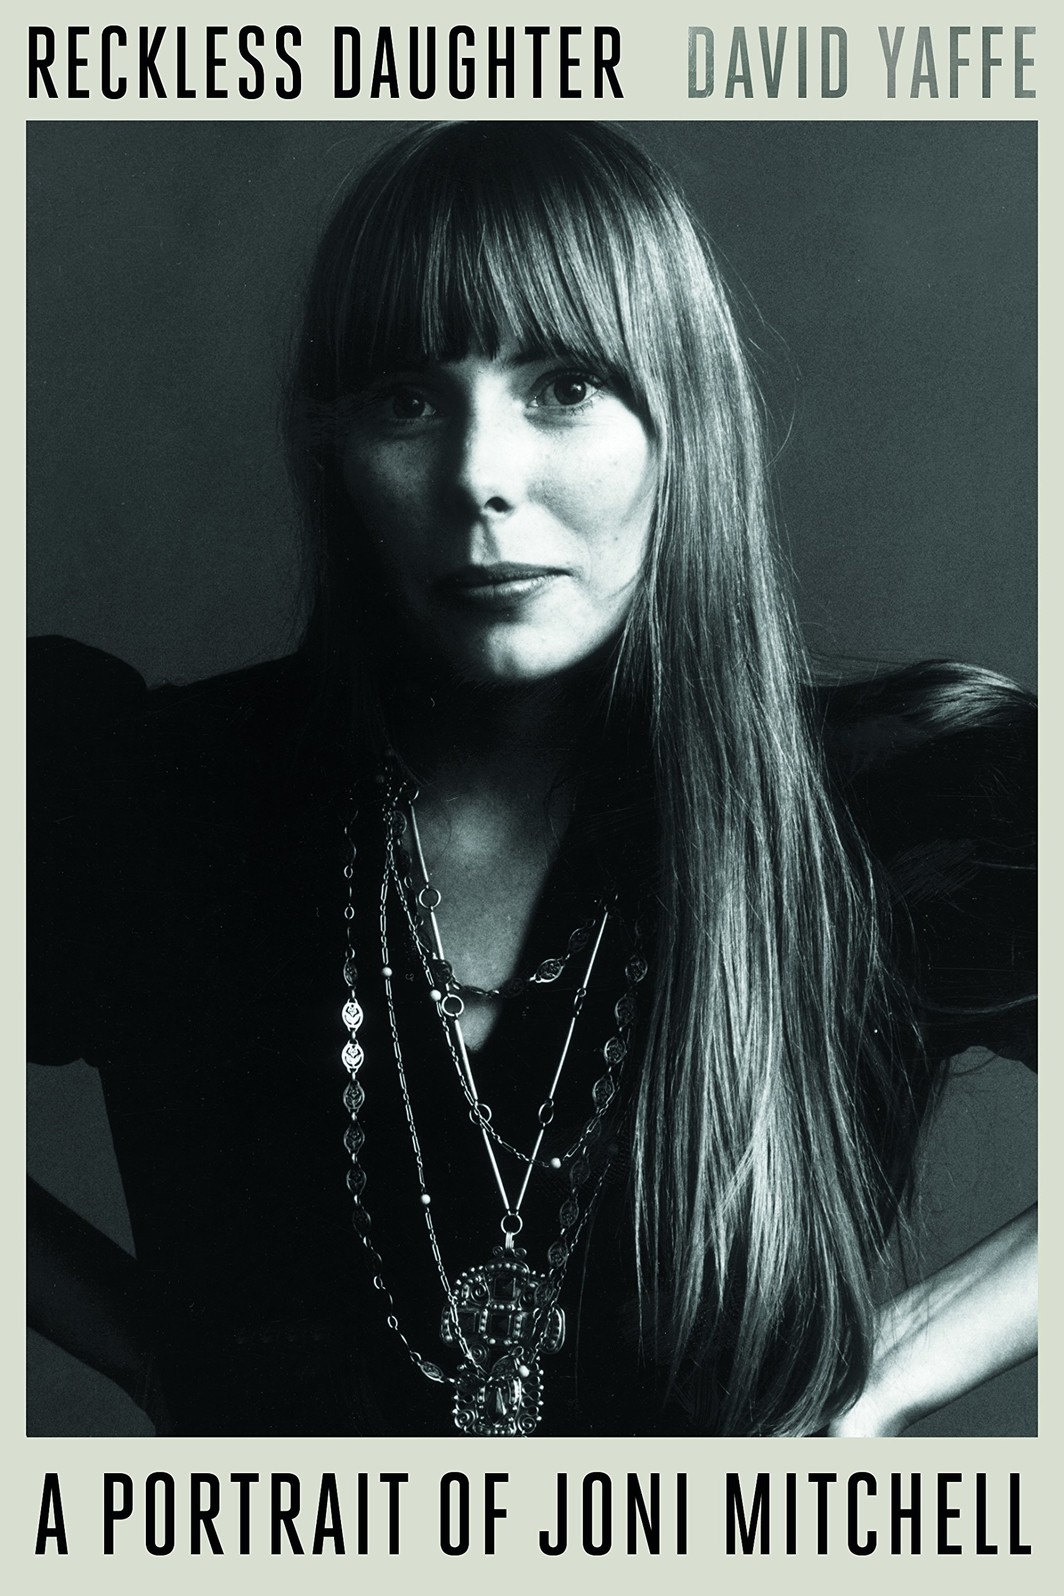 The cover of Reckless Daughter: A Portrait of Joni Mitchell